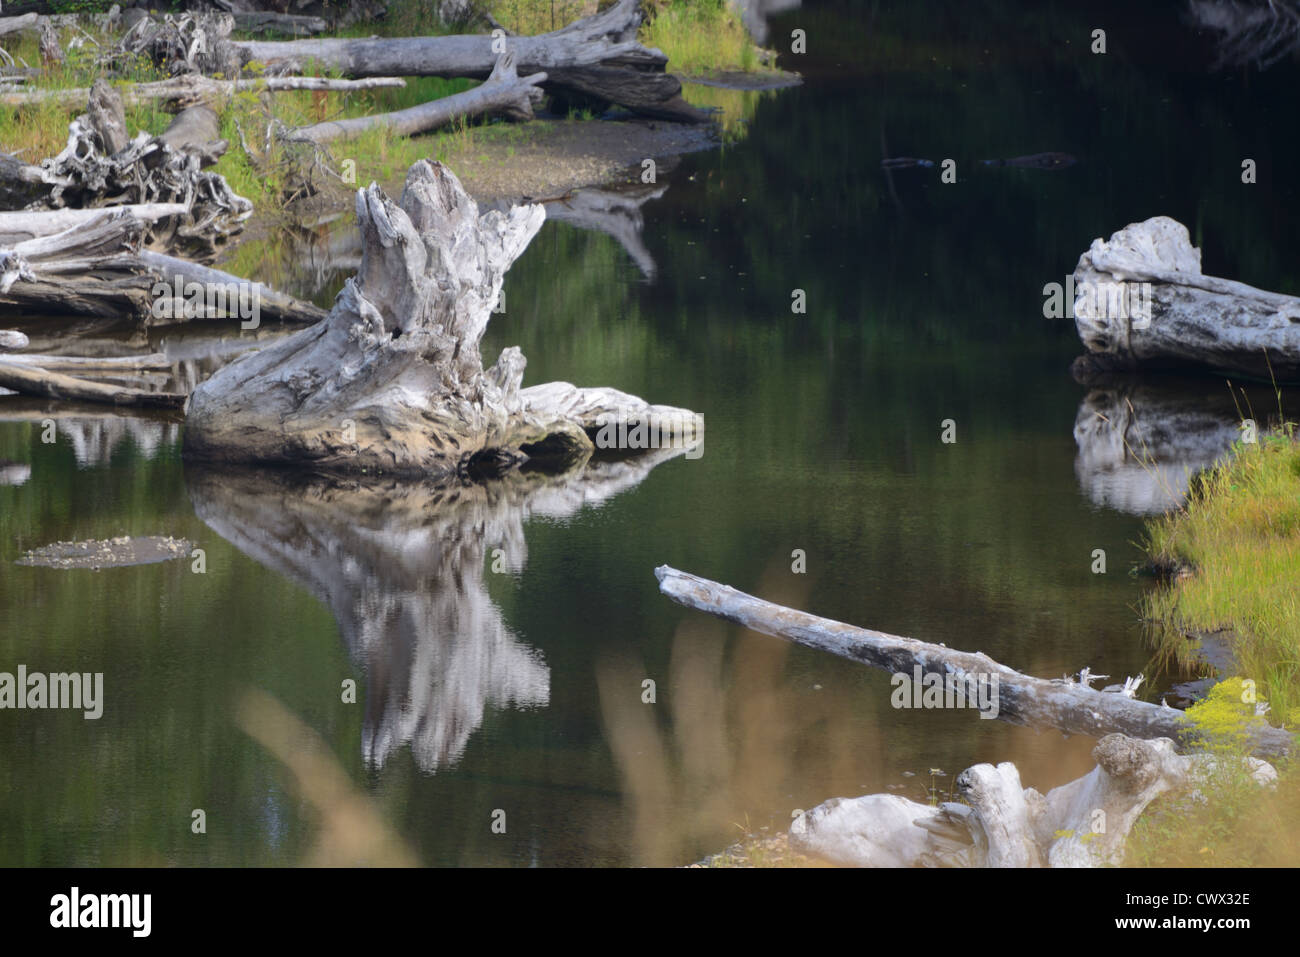 Photograph of a driftwood log with a reflection of itself in the water. Stock Photo